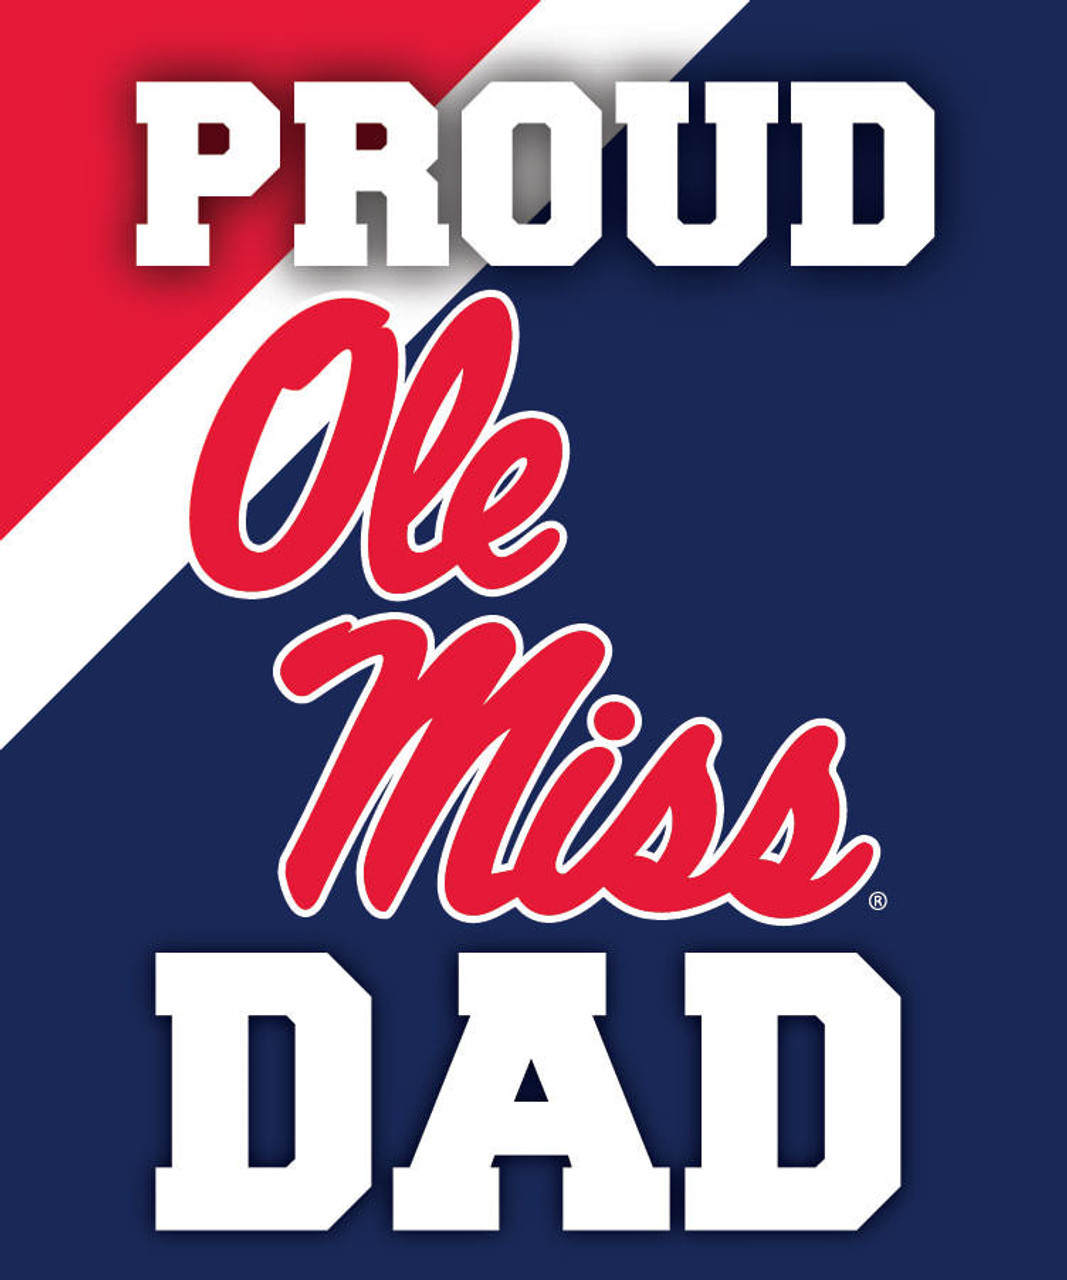 Mississippi Ole Miss Rebels NCAA Collegiate 5x6 Inch Rectangle Stripe Proud Dad Decal Sticker